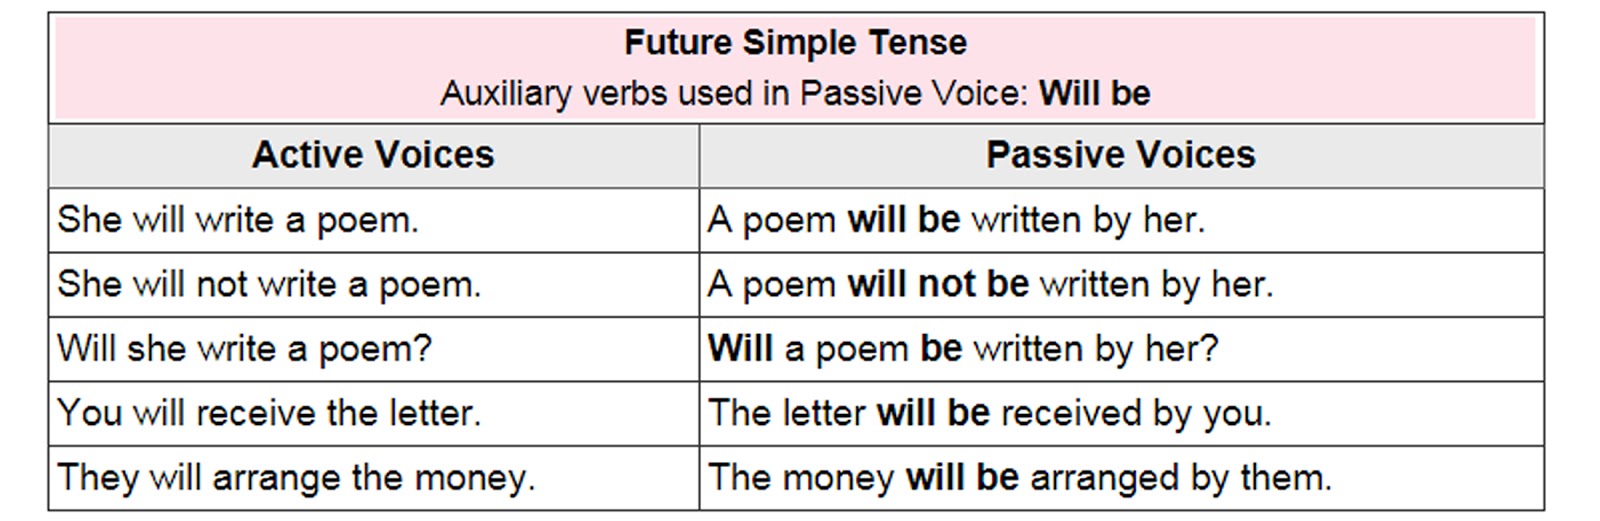 active-and-passive-voice-rules-simple-future-tense-english-grammar-a-to-z